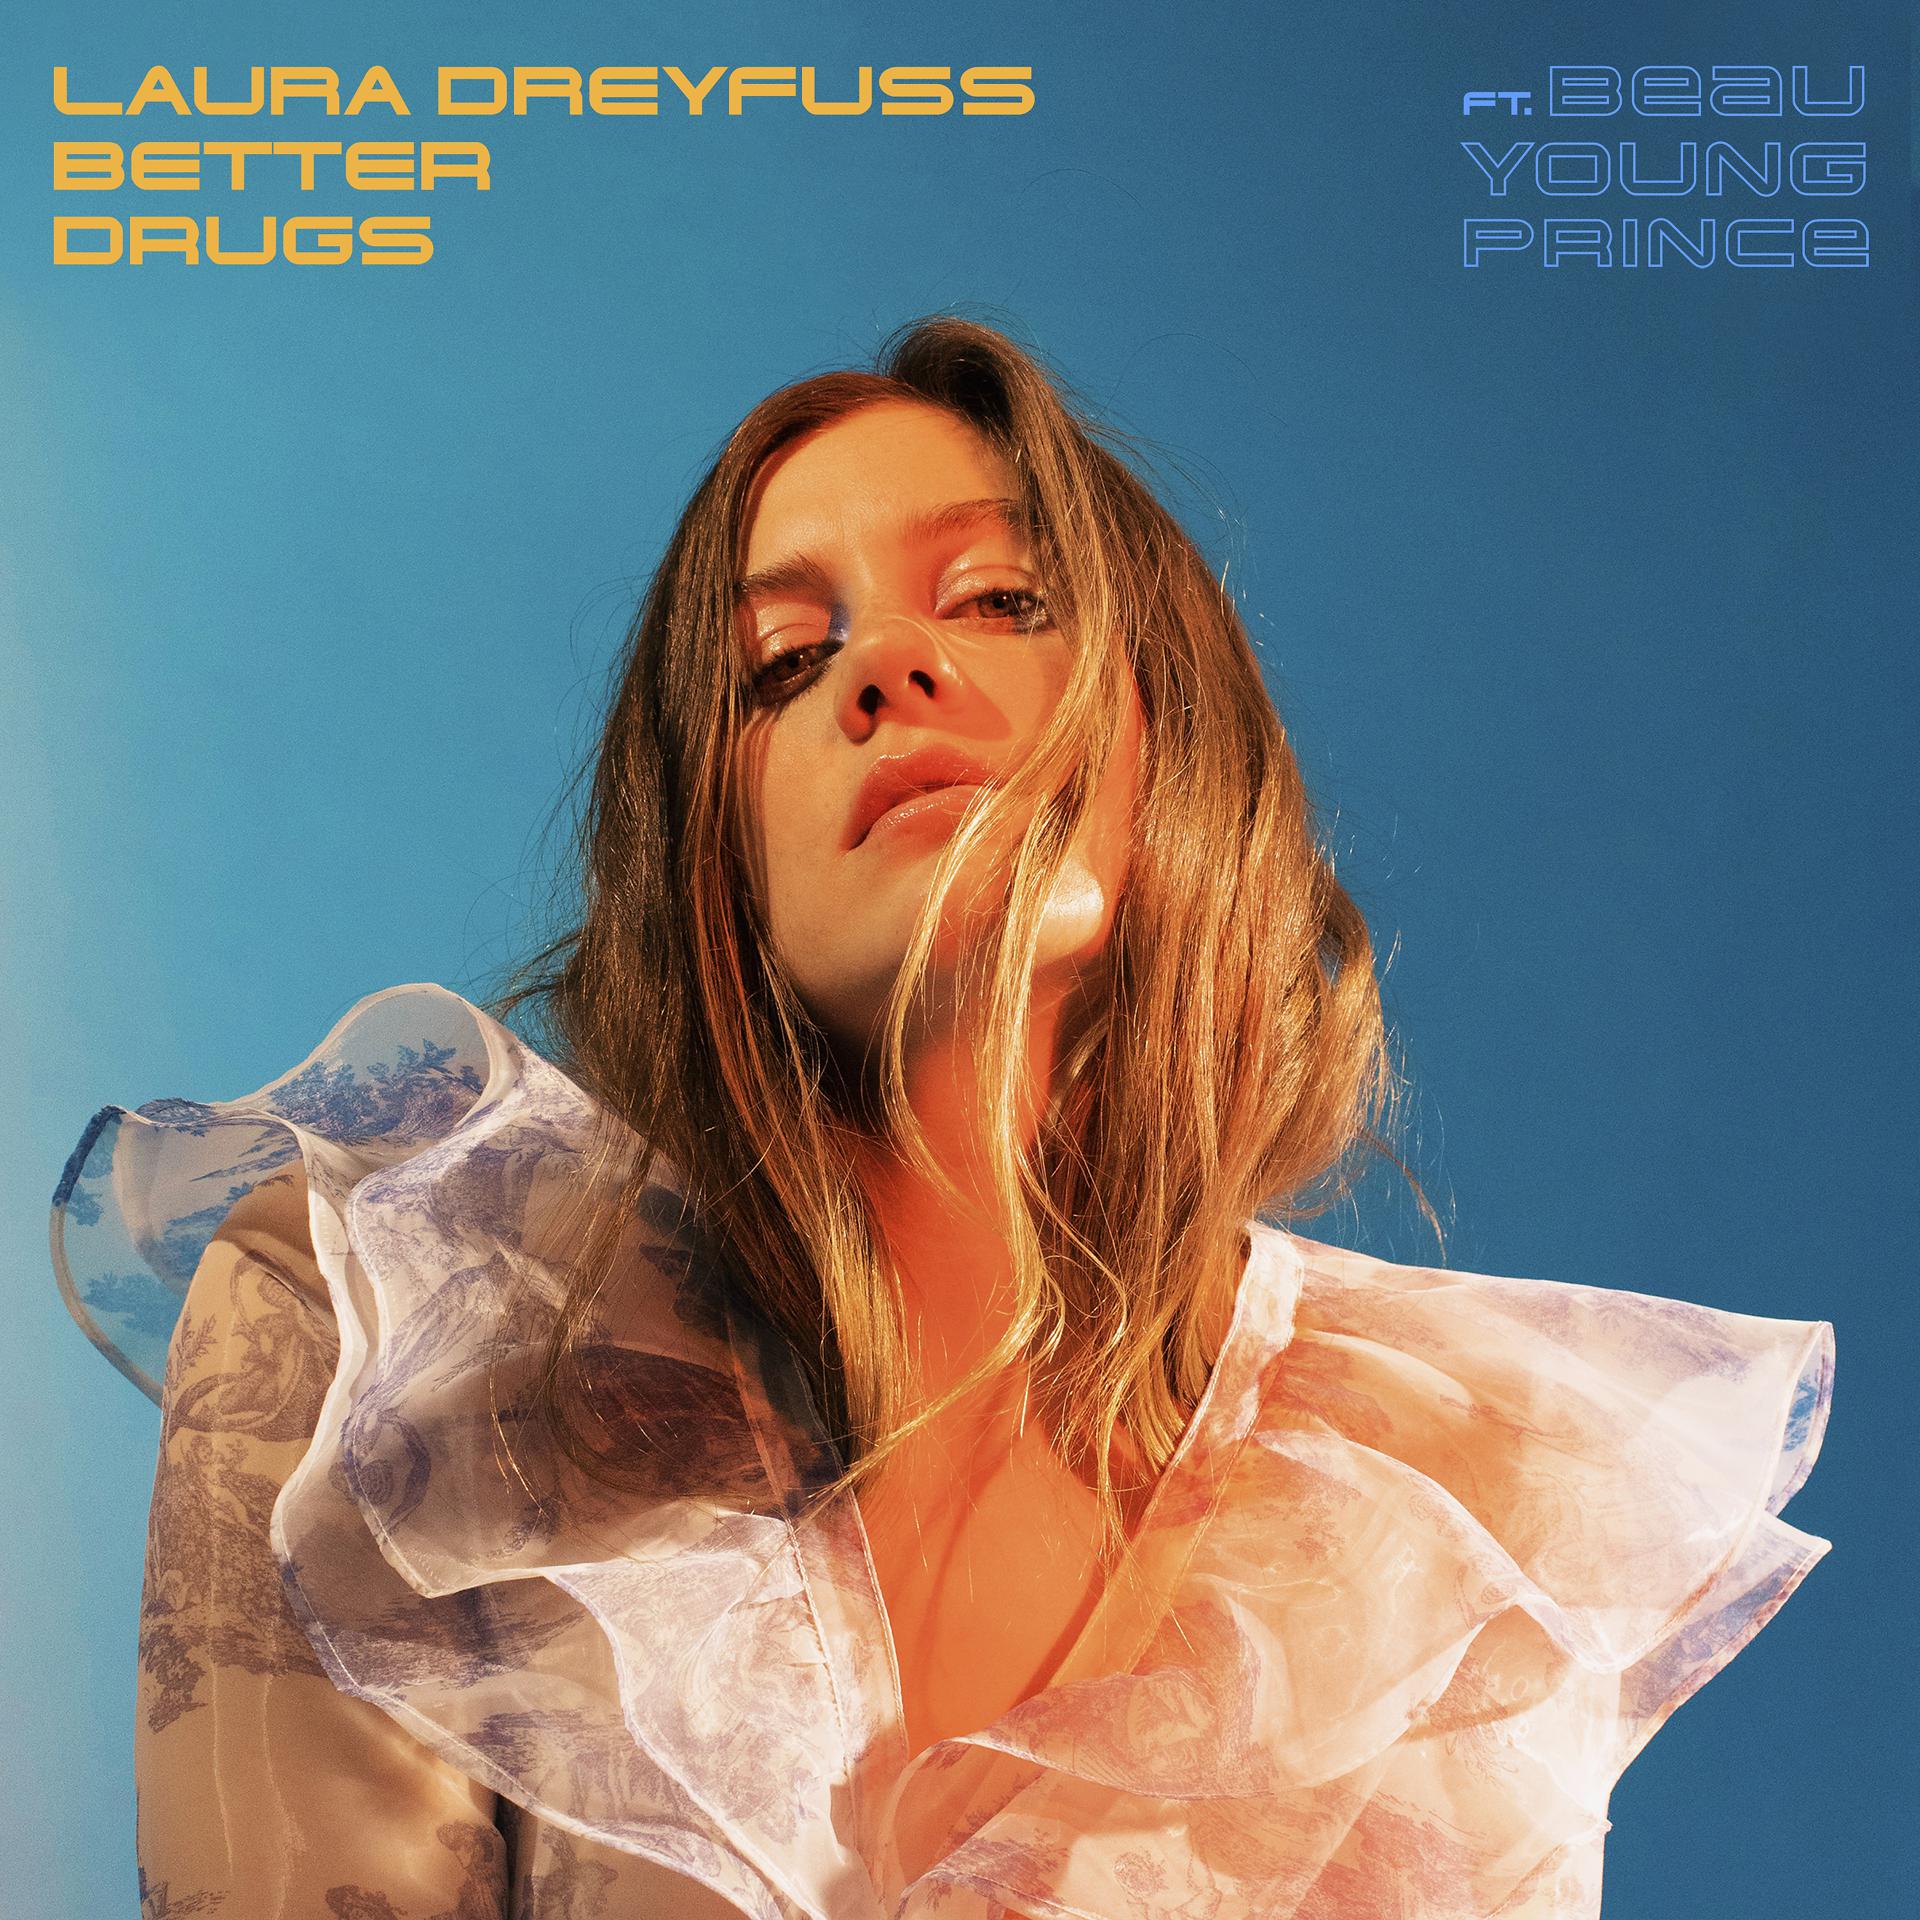 Постер к треку Laura Dreyfuss, Beau Young Prince - Better Drugs (feat. Beau Young Prince)